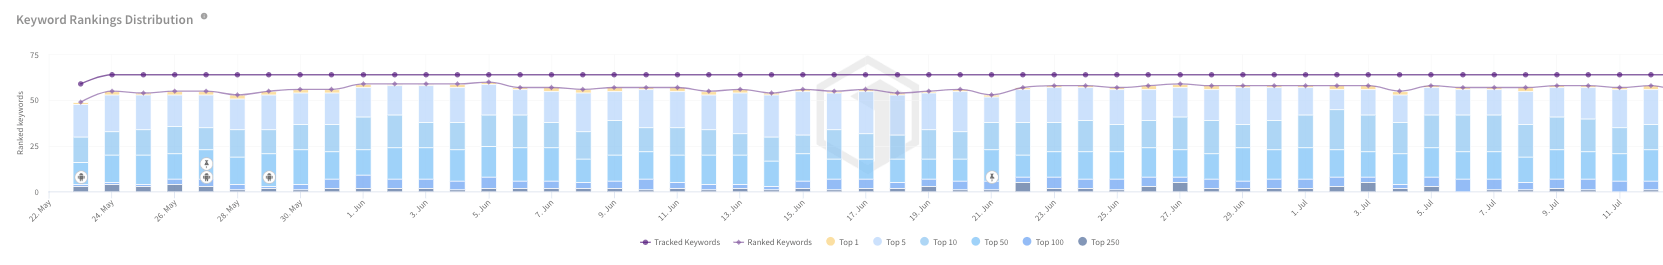 Keywords Rankings Distribution over time by TheTool